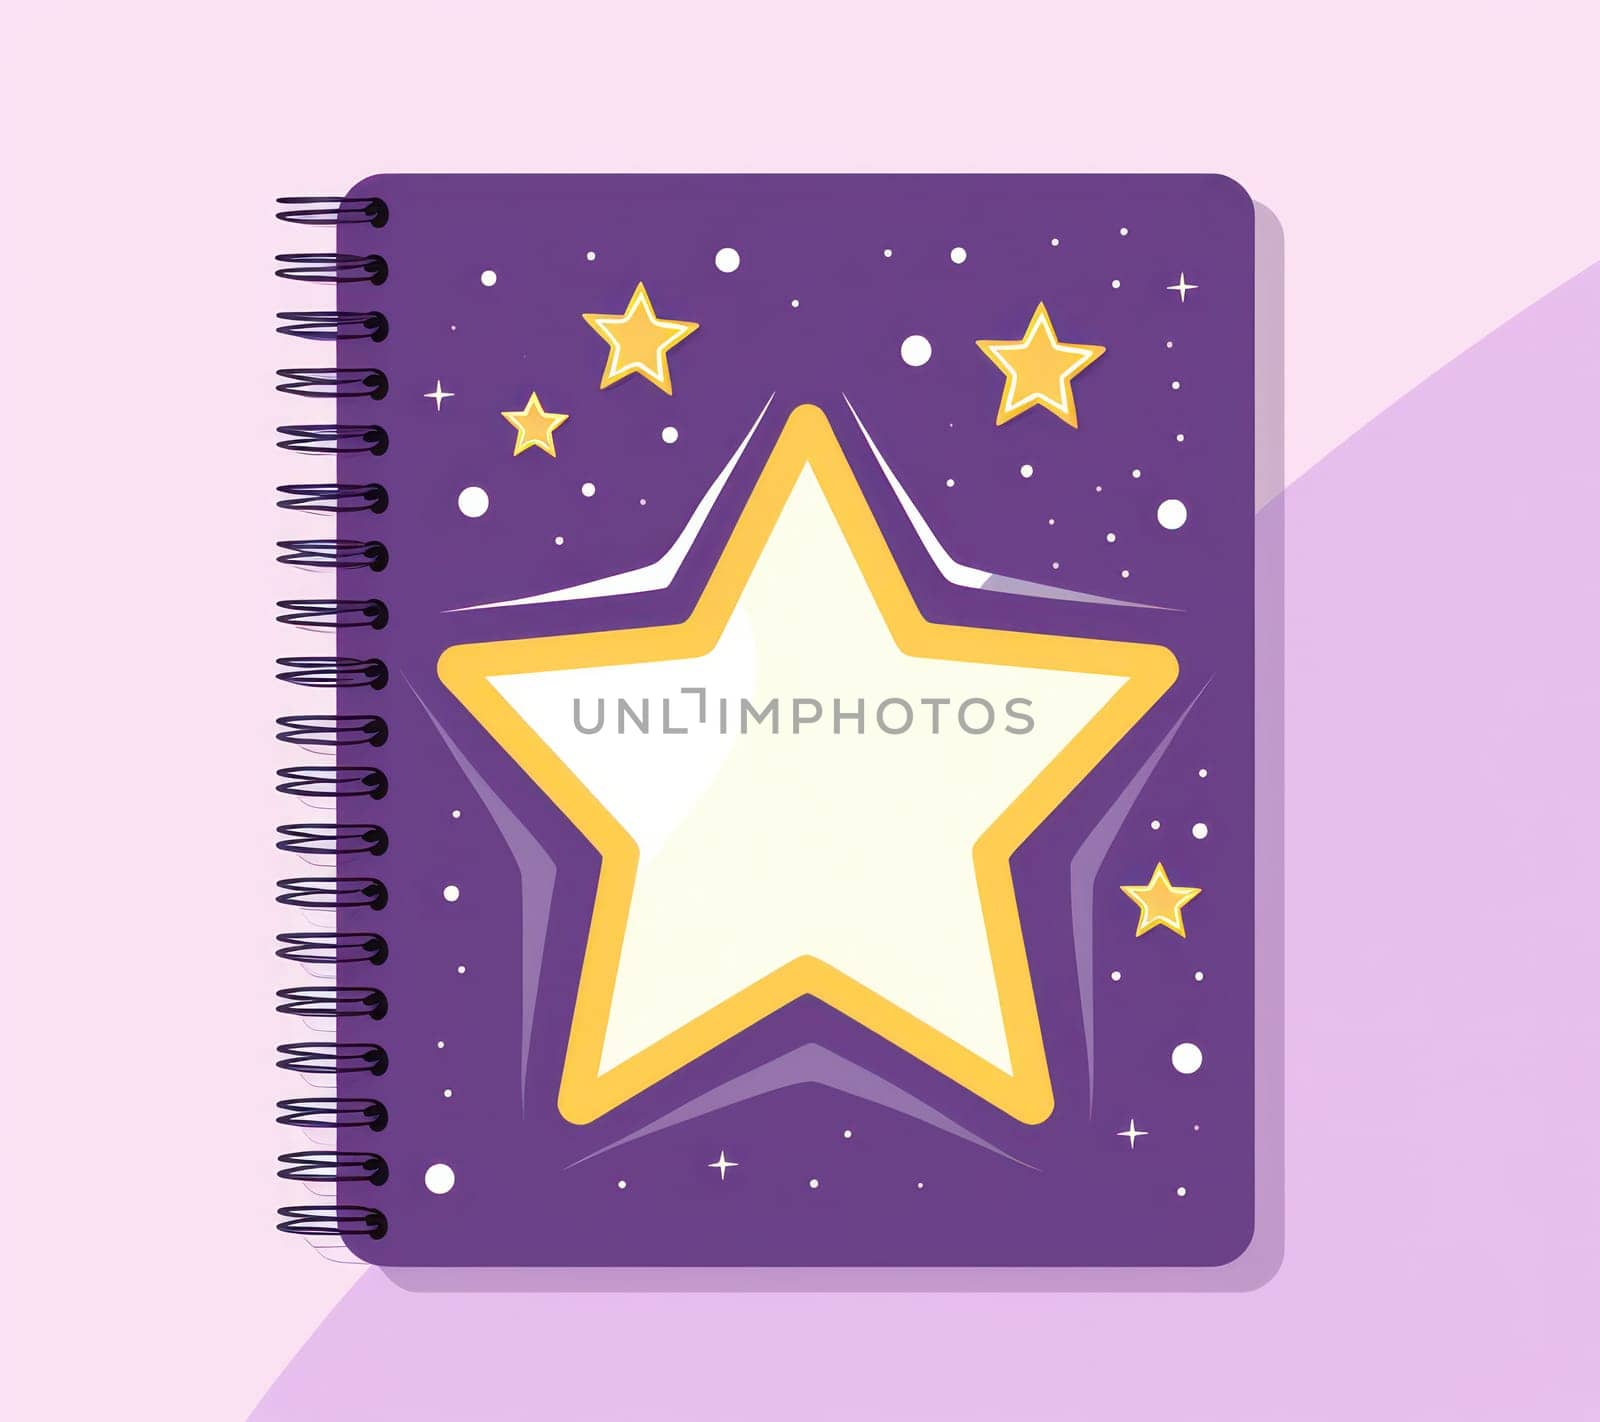 Blank Notebook with Paper and Pencil Icon on Glowing Pink Background: A Dreamy Open Diary for Learning and Creativity